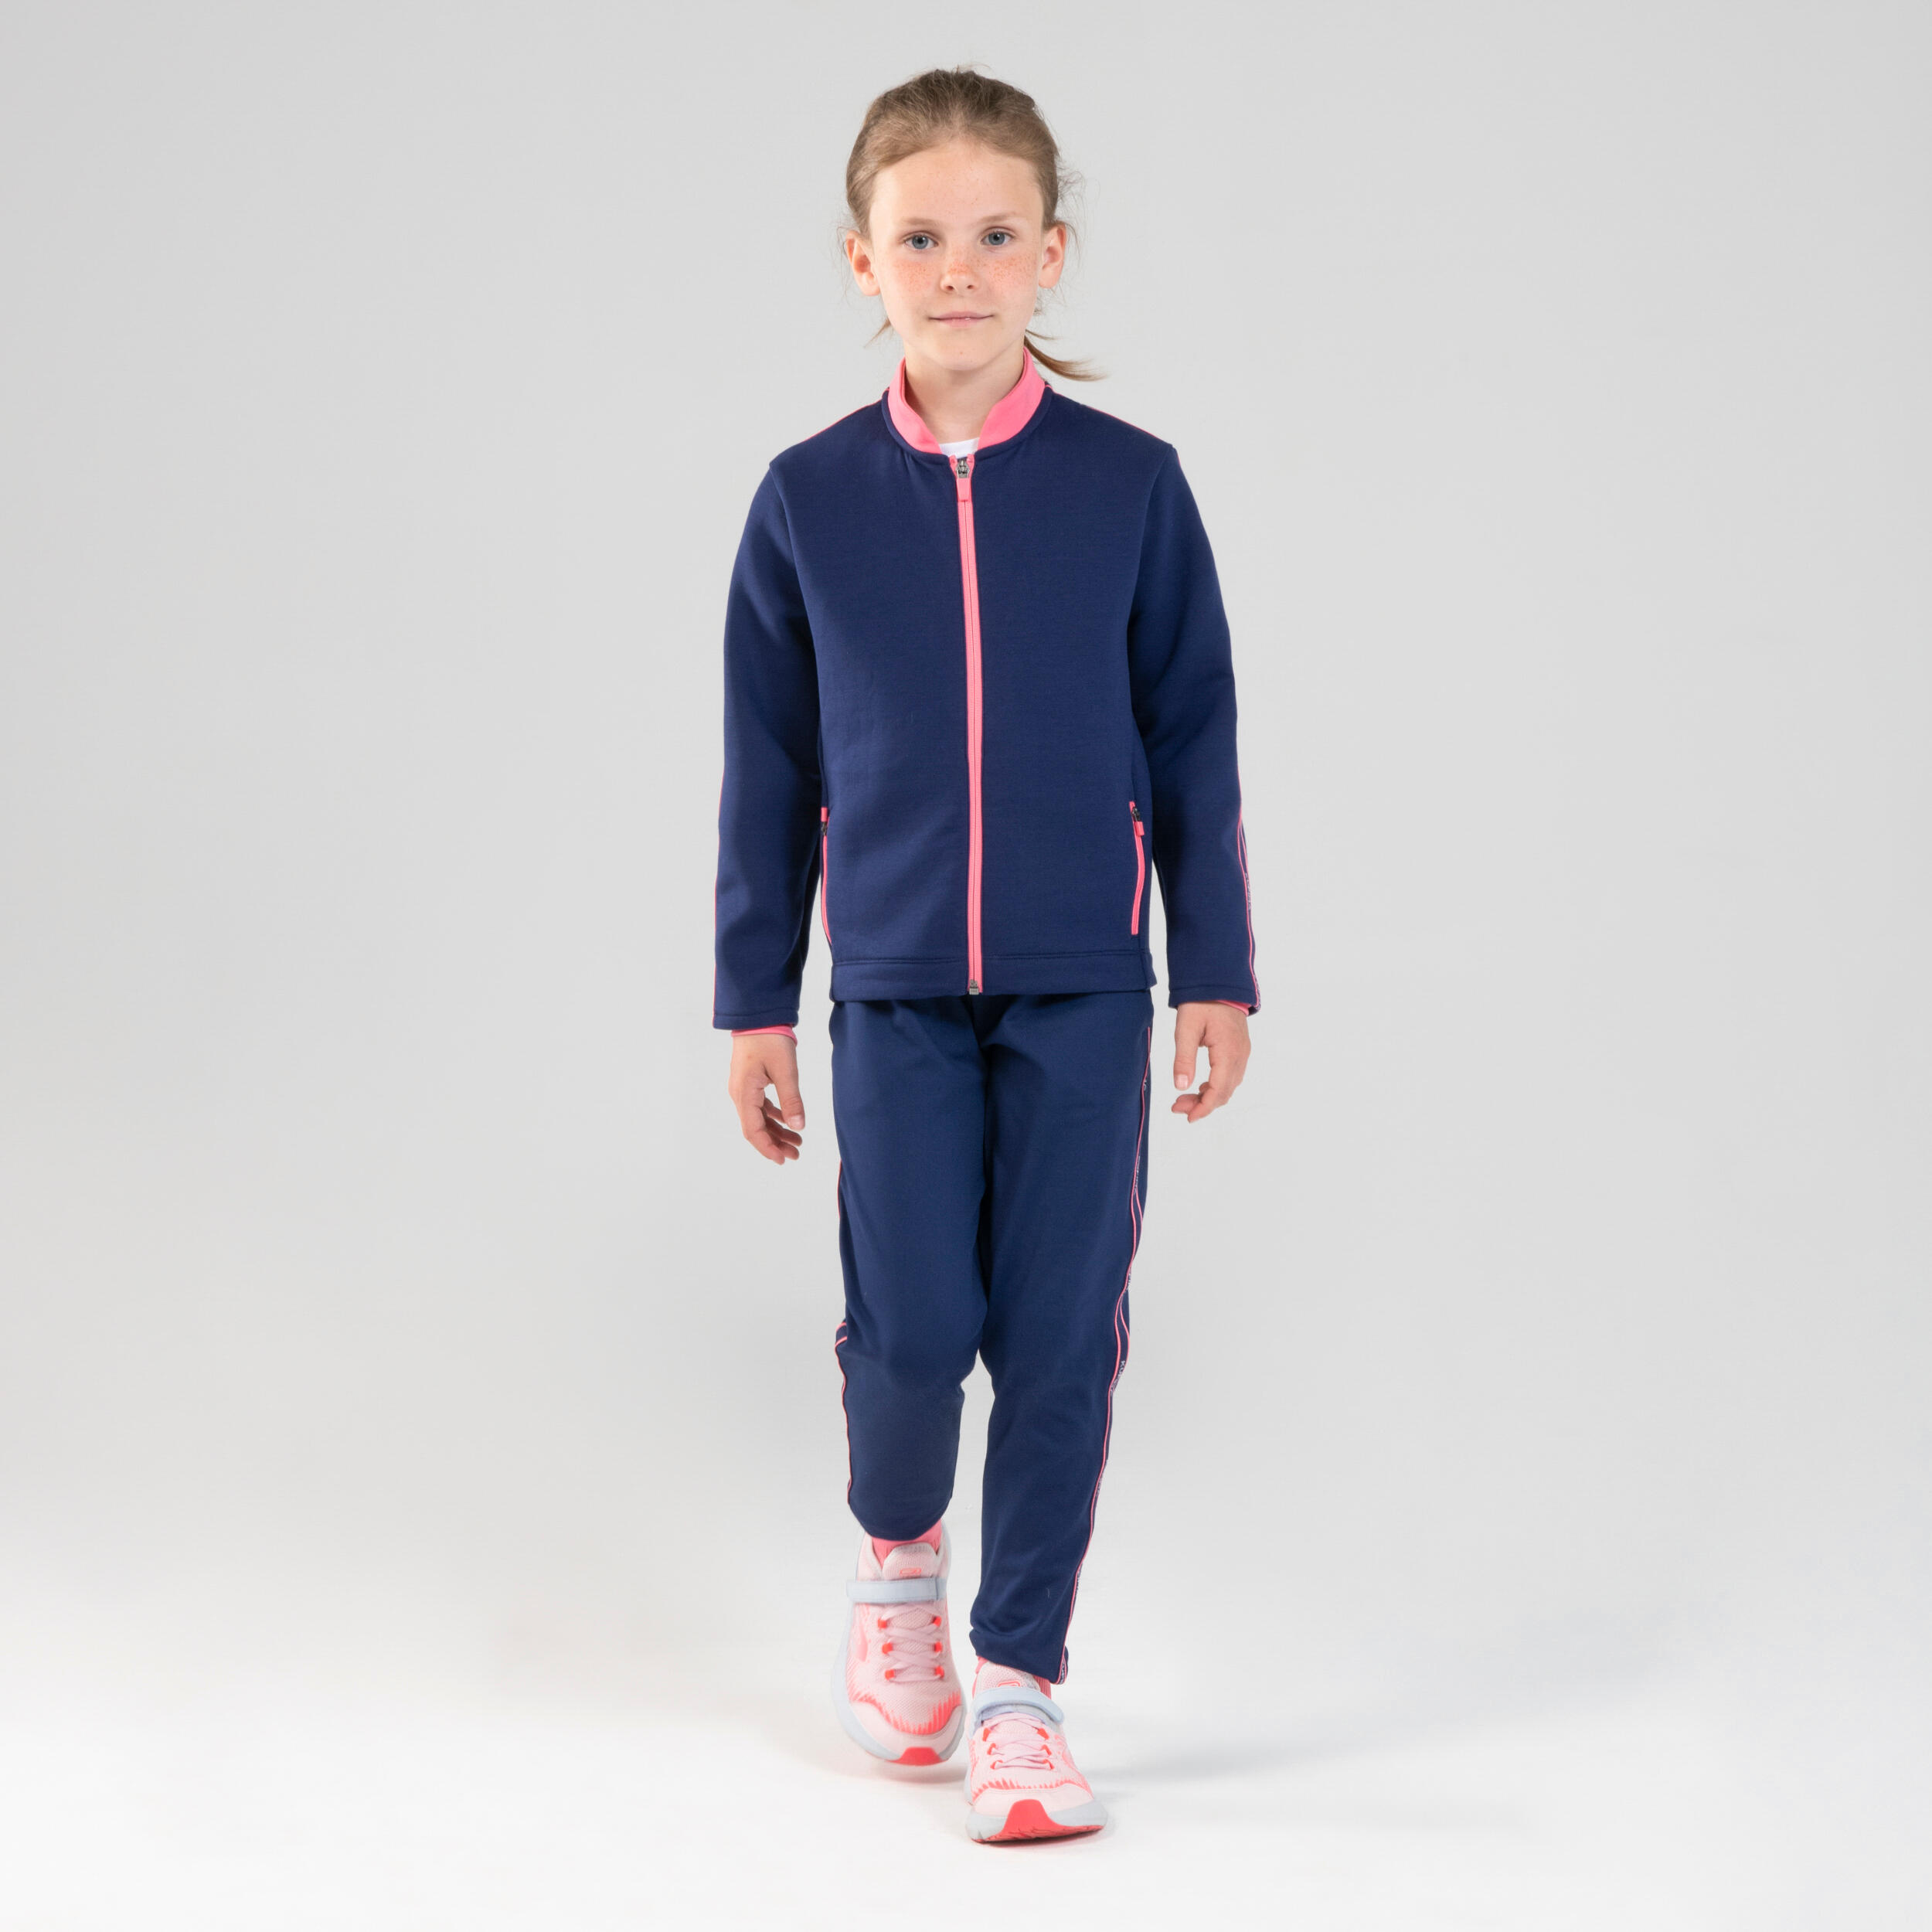 Kids' Warm Breathable Synthetic Jogging Bottoms S500 - Navy/Pink 4/11